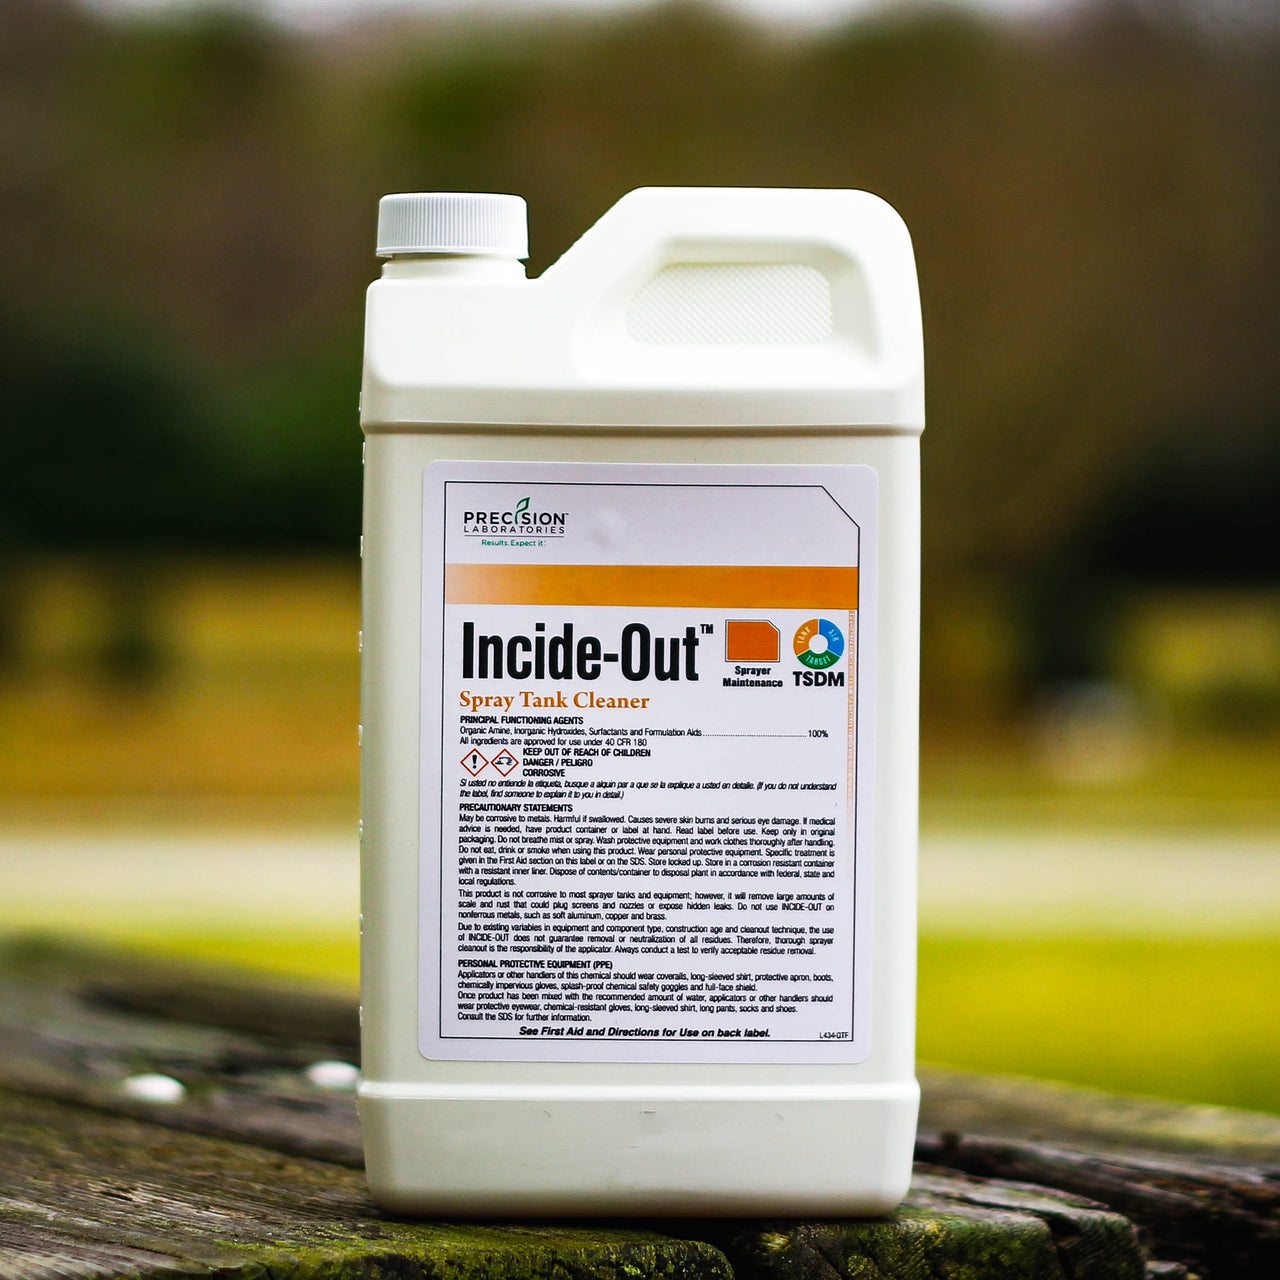 Incide-Out Spray Tank Cleaner: Keeping Residue from Building Up